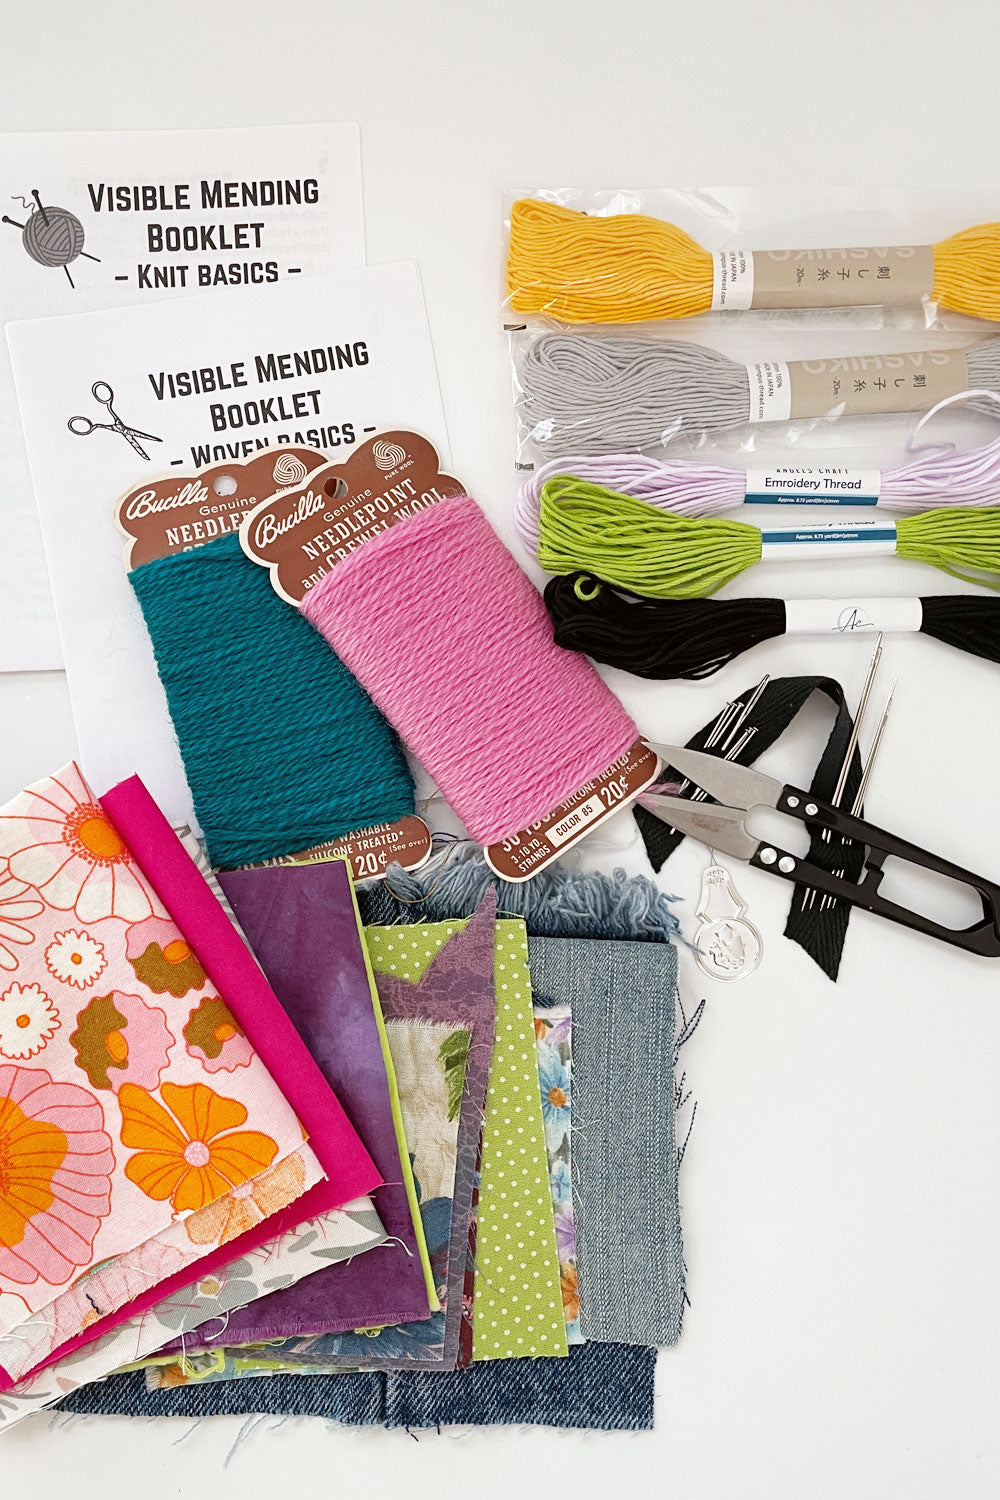 Assortment of mending supplies: Visible mending booklets for knit and woven fabrics made from paper. 2 sashiko threads, 2 embroidery threads, 2 needlepoint crewel wool cards, thread snips, needles and pins on cotton twill tape, and small assortment of cotton and denim fabric scraps. 